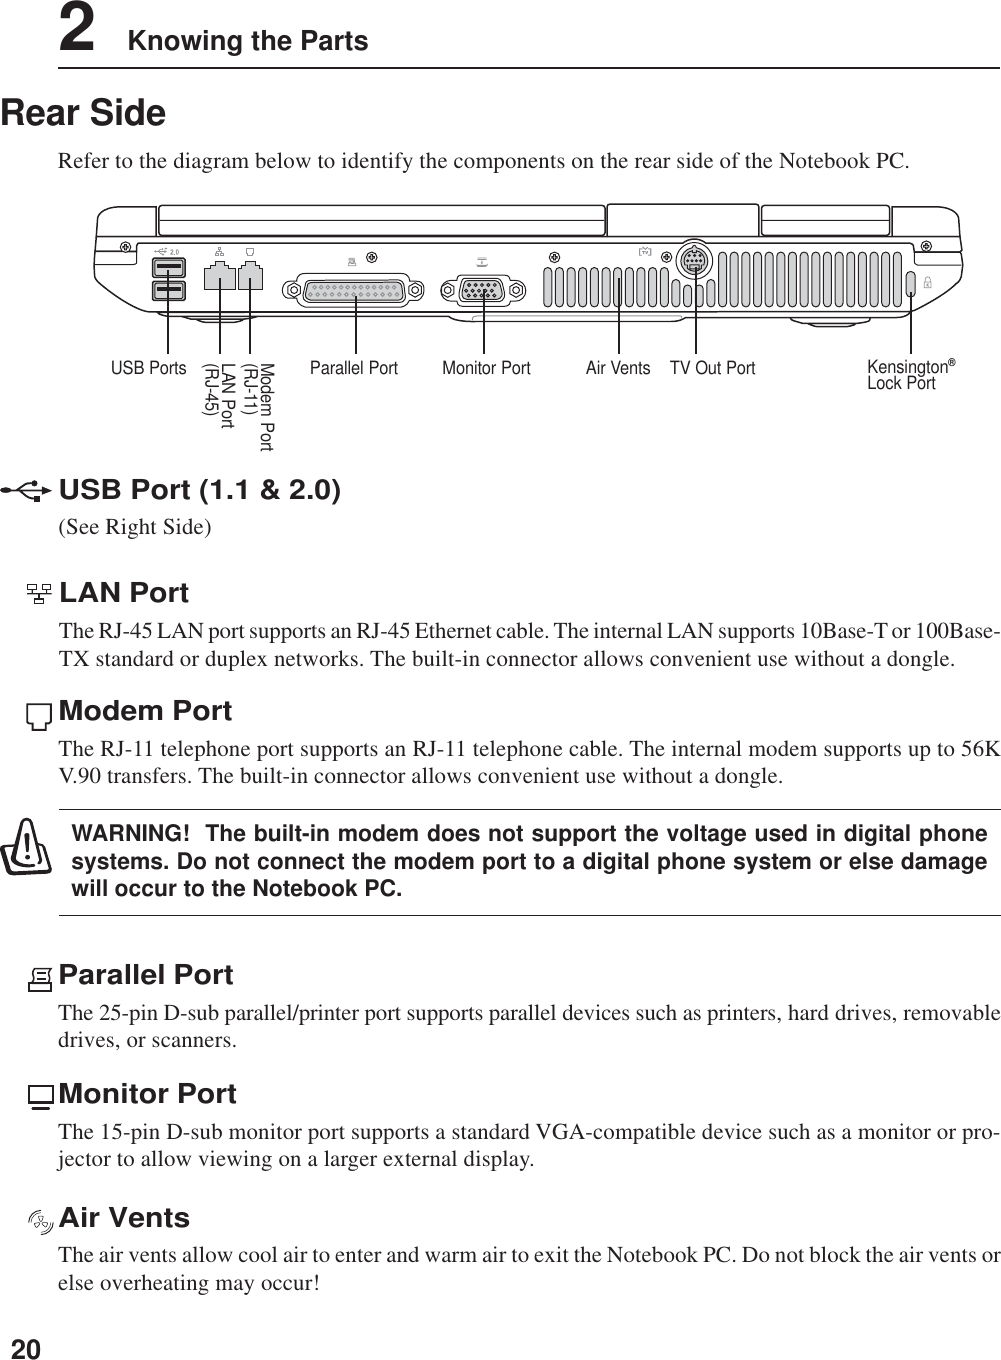 202    Knowing the PartsRear SideRefer to the diagram below to identify the components on the rear side of the Notebook PC.Parallel PortThe 25-pin D-sub parallel/printer port supports parallel devices such as printers, hard drives, removabledrives, or scanners.Monitor PortThe 15-pin D-sub monitor port supports a standard VGA-compatible device such as a monitor or pro-jector to allow viewing on a larger external display.LAN PortThe RJ-45 LAN port supports an RJ-45 Ethernet cable. The internal LAN supports 10Base-T or 100Base-TX standard or duplex networks. The built-in connector allows convenient use without a dongle.Modem PortThe RJ-11 telephone port supports an RJ-11 telephone cable. The internal modem supports up to 56KV.90 transfers. The built-in connector allows convenient use without a dongle.WARNING!  The built-in modem does not support the voltage used in digital phonesystems. Do not connect the modem port to a digital phone system or else damagewill occur to the Notebook PC.USB Port (1.1 &amp; 2.0)(See Right Side)Modem Port(RJ-11)LAN Port(RJ-45)Monitor Port Air VentsUSB Ports Parallel Port Kensington®Lock PortTV Out PortAir VentsThe air vents allow cool air to enter and warm air to exit the Notebook PC. Do not block the air vents orelse overheating may occur!